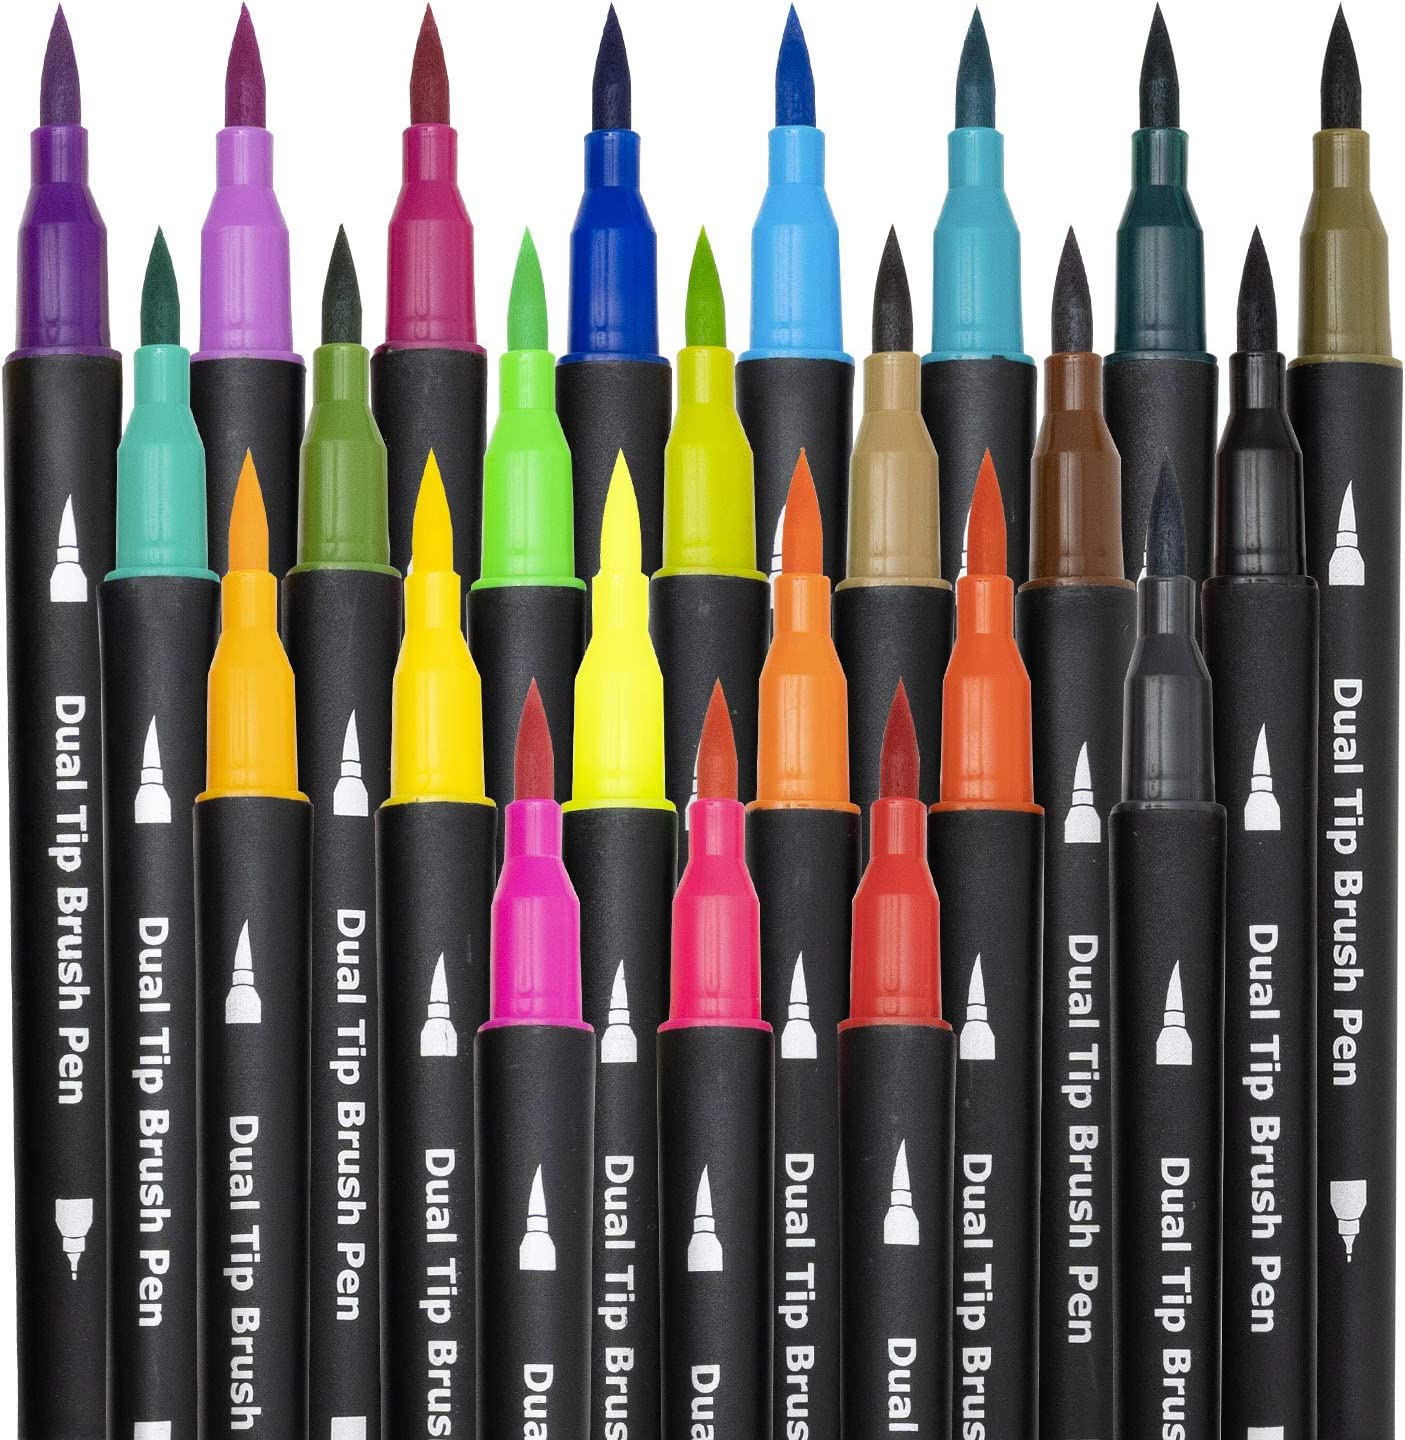 Duslogis Dual Brush Marker Pens for Coloring,24 Colored Markers,Fine Point  and Brush Tip Art Markers for Kids Adult Coloring Books Bullet Journals